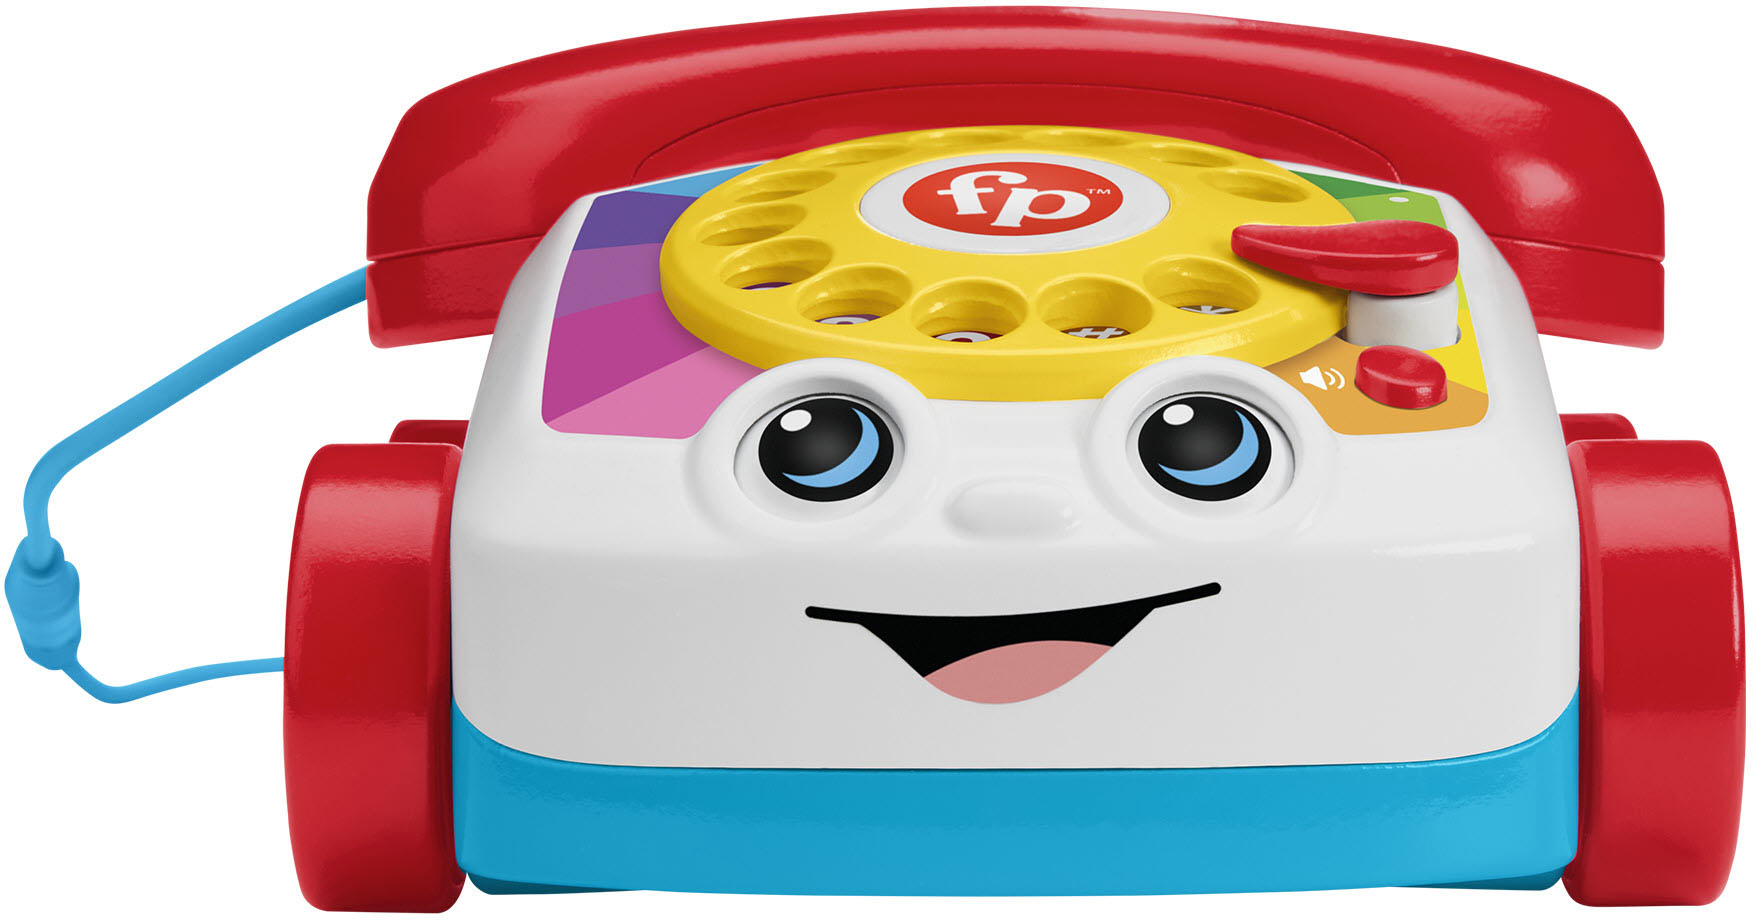 Fisher Price's Chatter Telephone Now Actually Makes Phone Calls